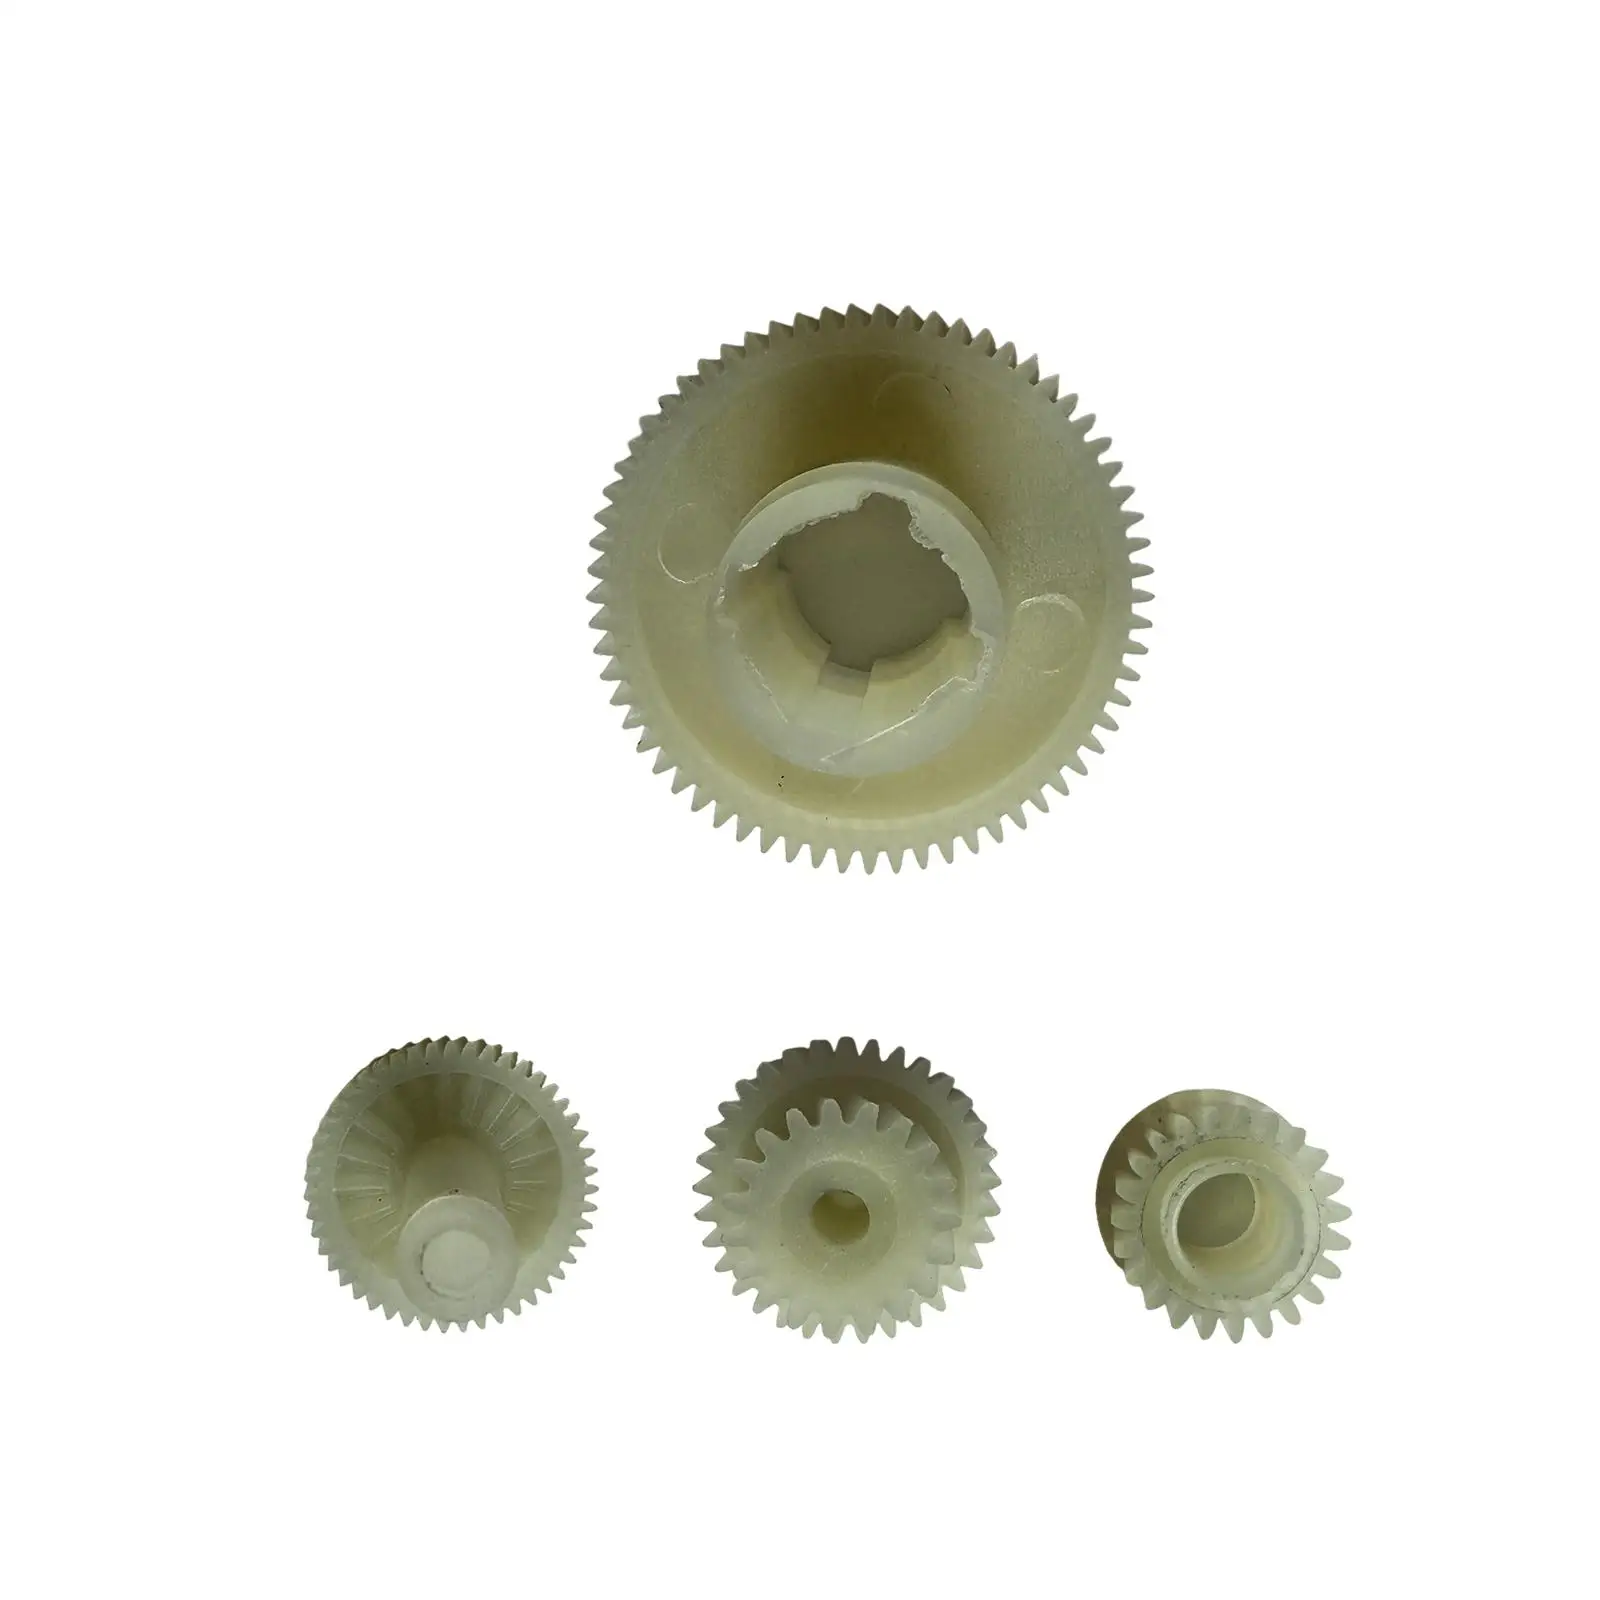 Parking Brake Actuator Repair Gears Replace Parts Durable High Quality for Land Rover Range Rover Sport Discovery 3 4